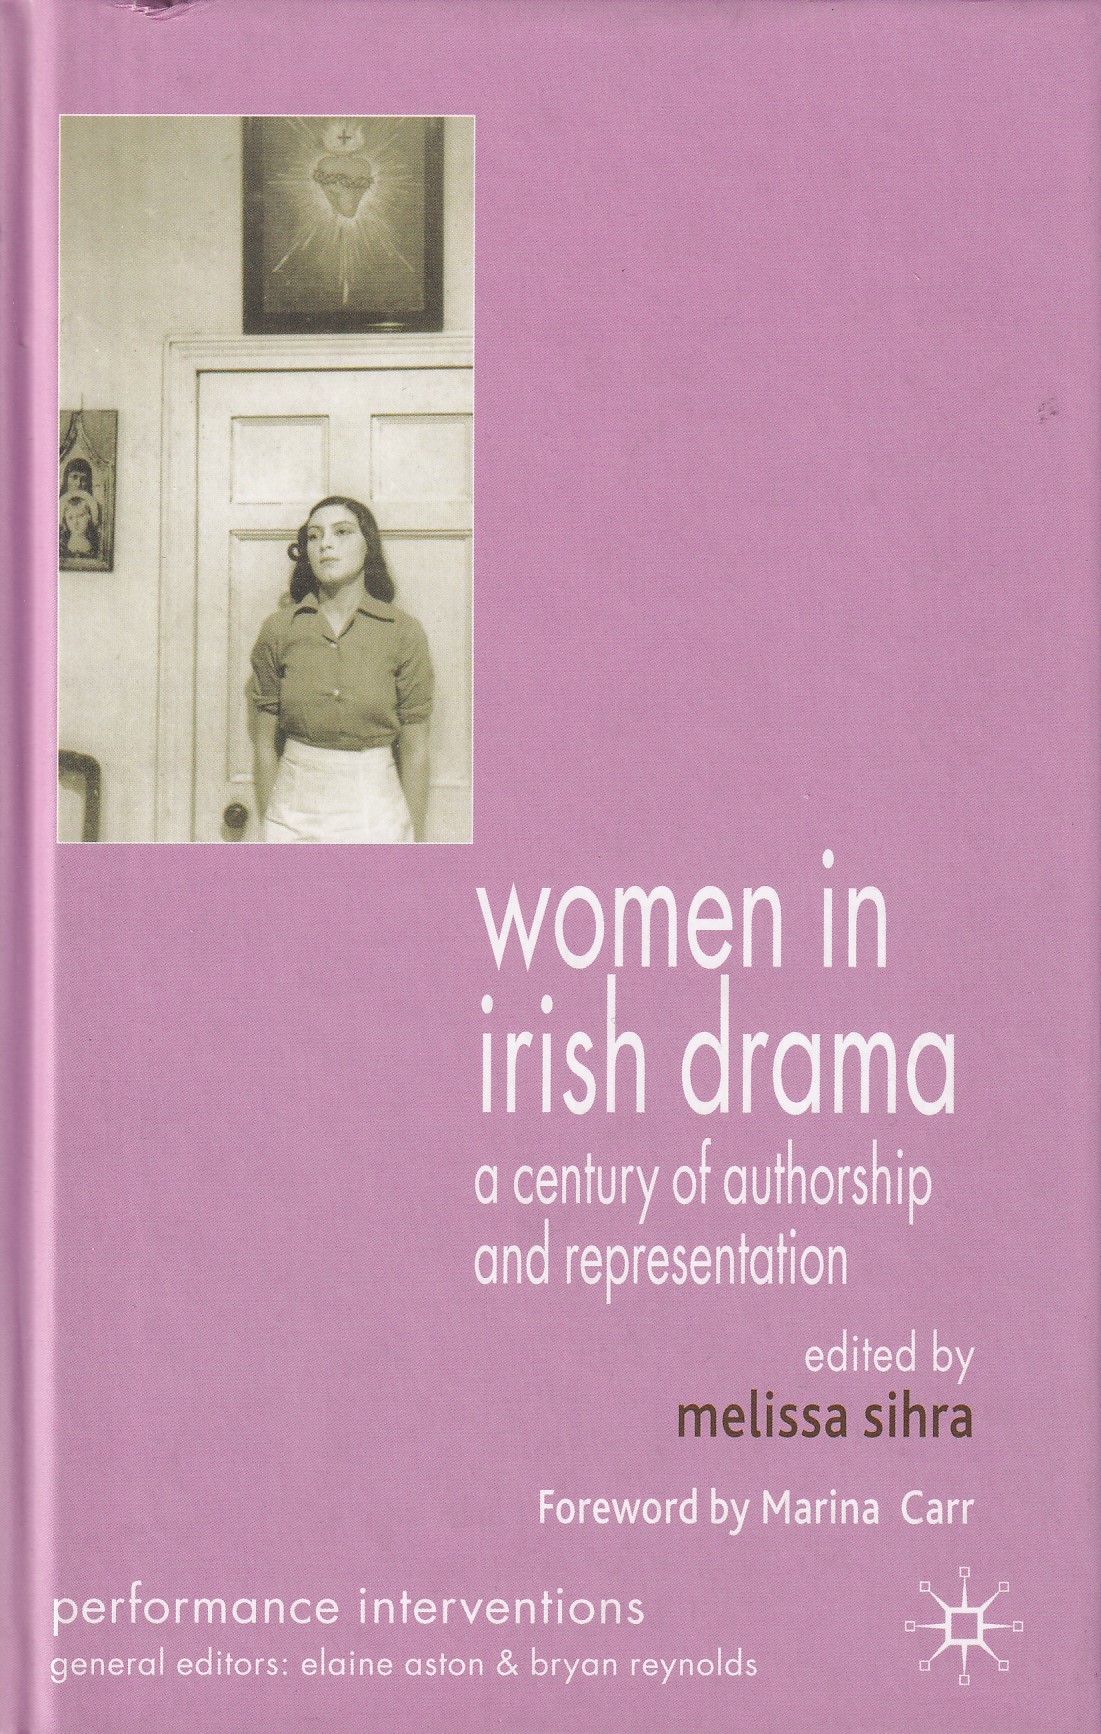 Women in Irish Drama: A Century of Authorship and Representation | Melissa Sihra (ed.) | Charlie Byrne's